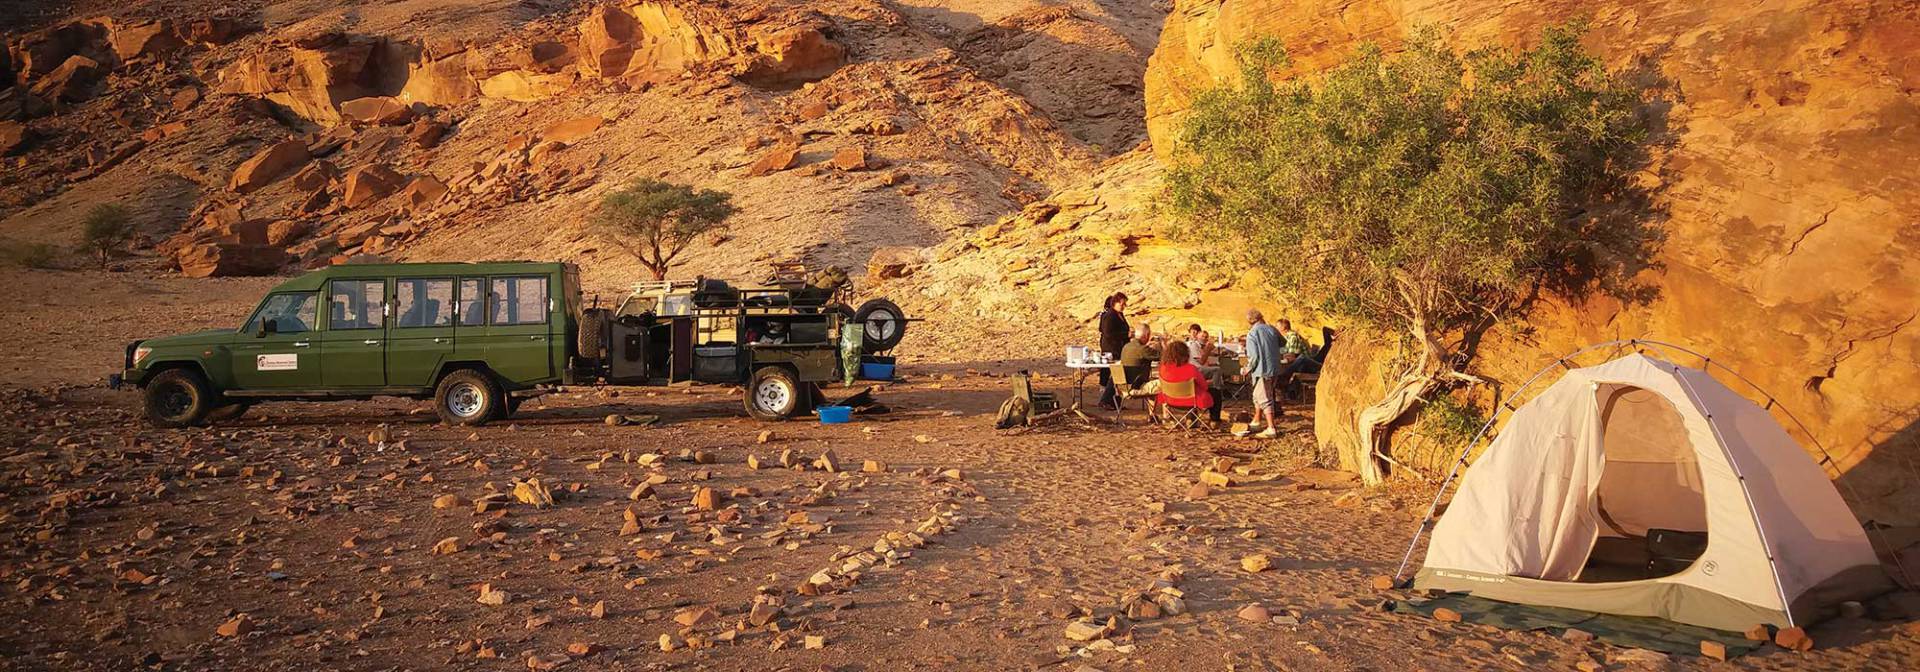 "Wildes" Camping in Namibia